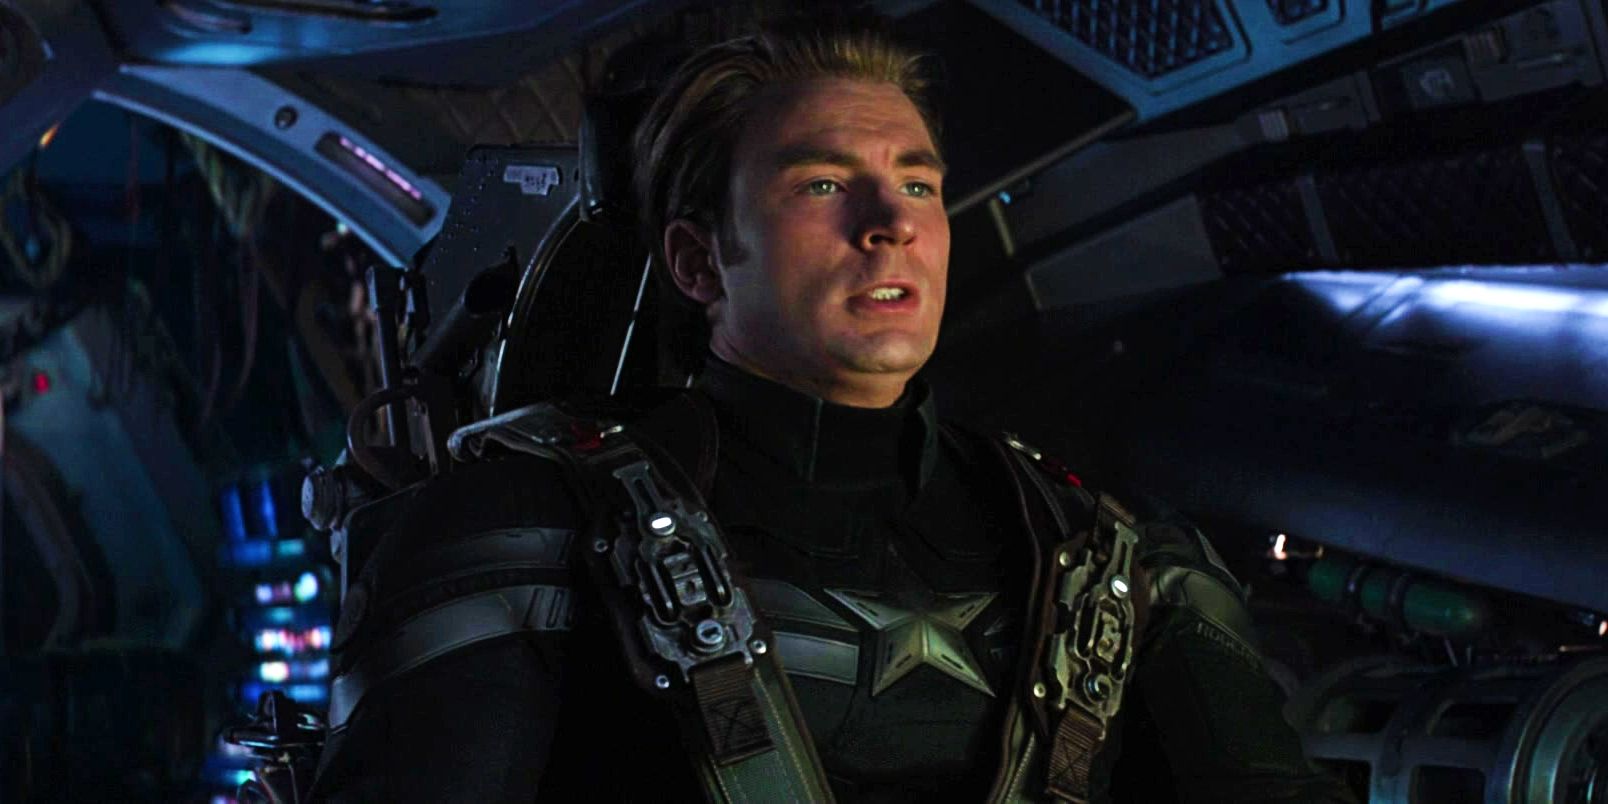 Captain America goes to space in Avengers Endgame